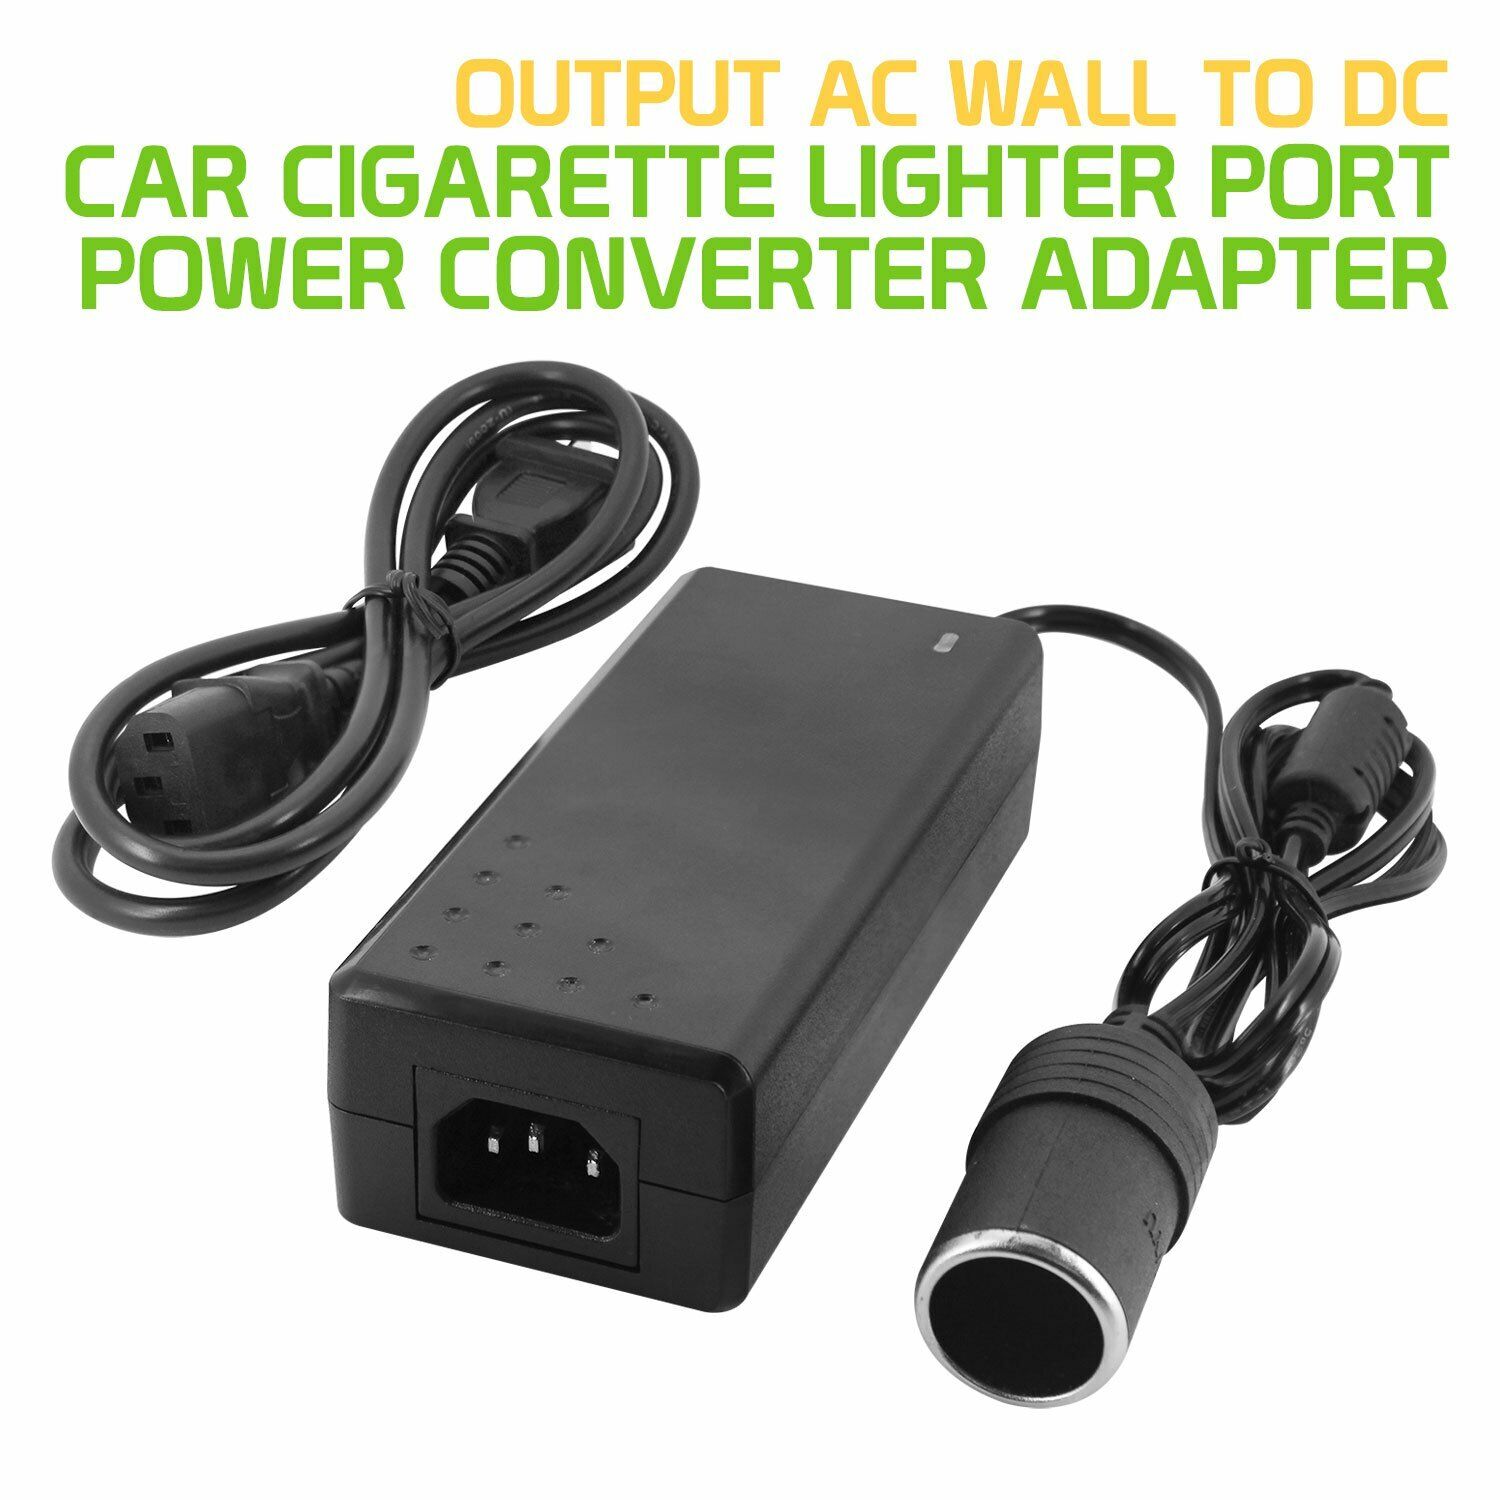 Power Converter AC Wall to DC Car Cigarette Lighter Port Female Adapter 8.5Amp Compatible Brand For Acer, For Amazon, F